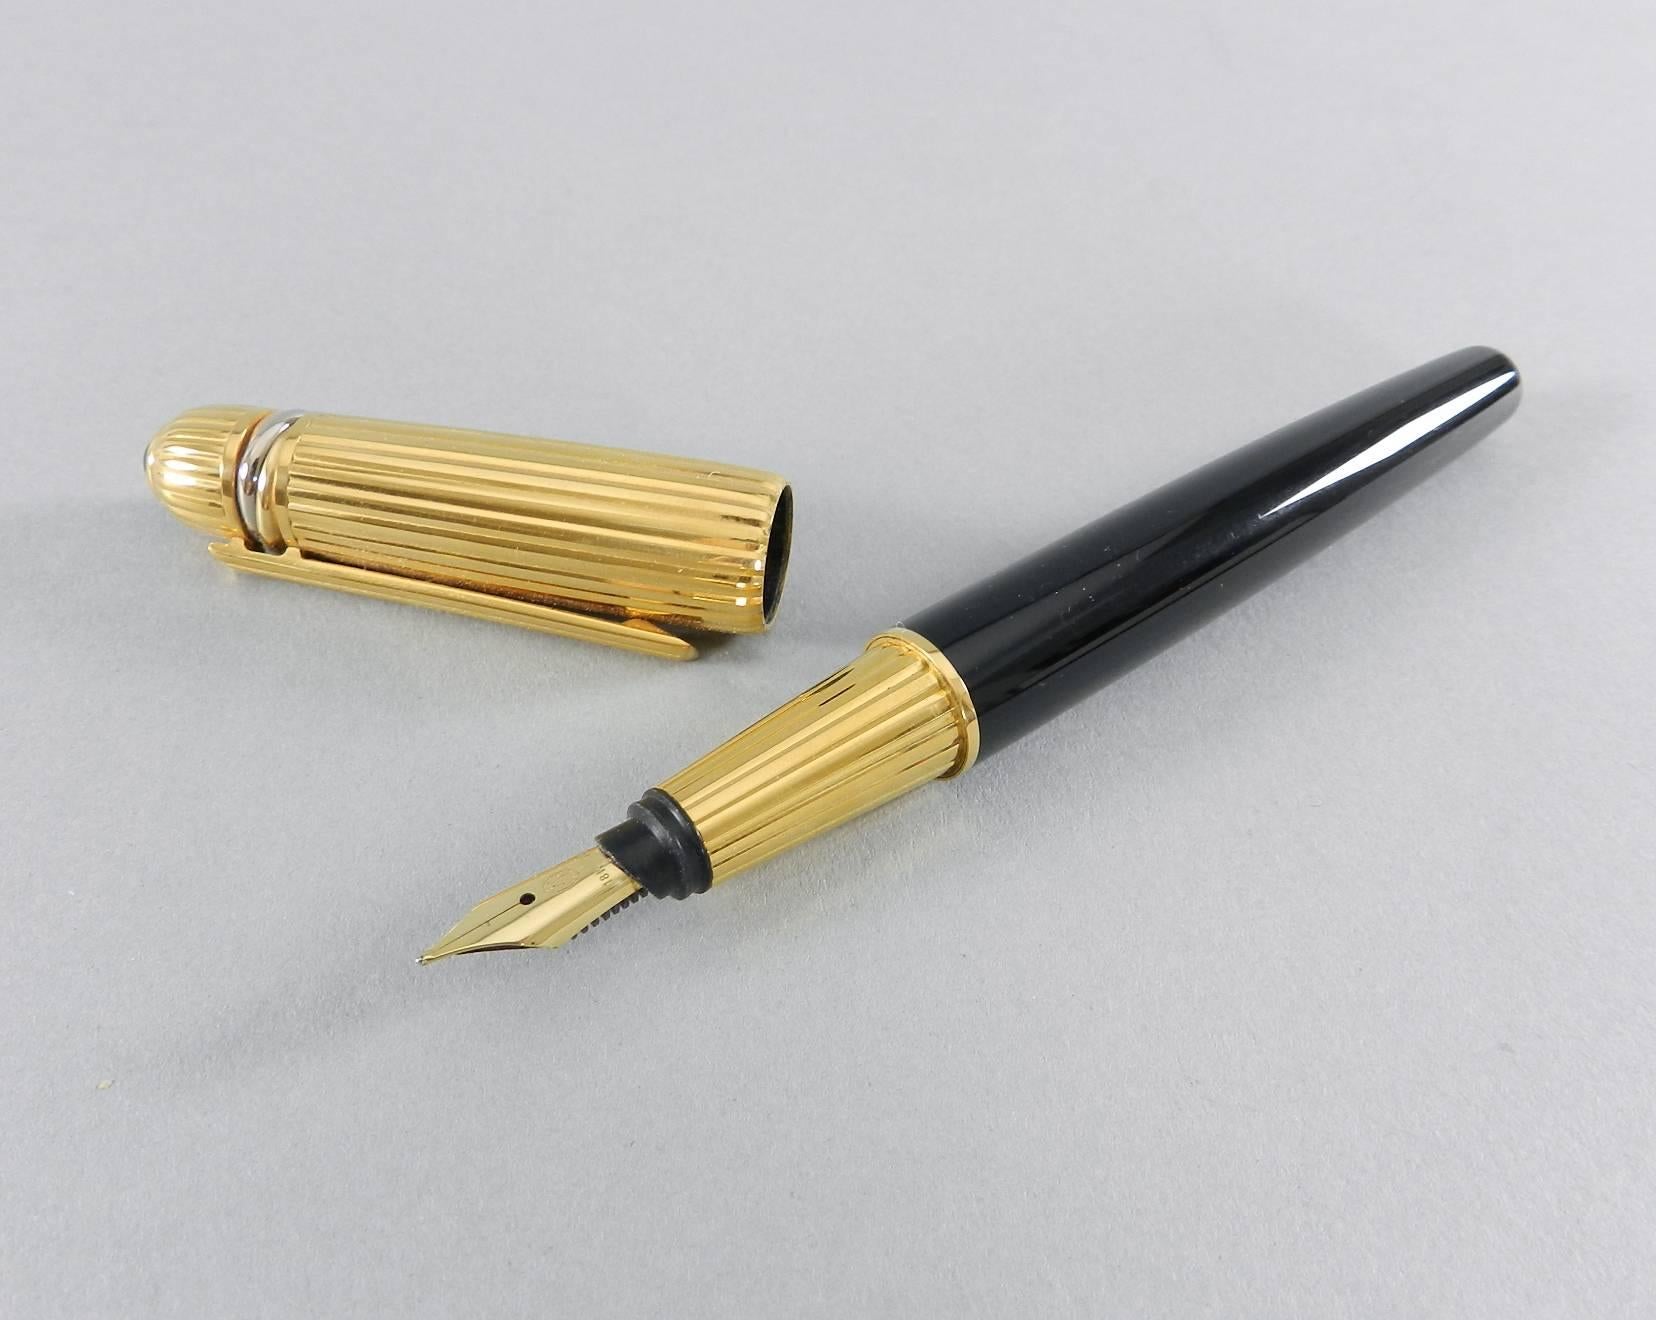 Pasha de Cartier fountain pen with inkwell.  Black and gold pen with onyx tipped cap.  Pen nib is marked 18k - 750. Pen lid is marked Pasha de Cartier 1989 with serial number 4770 and has a three metal trinity band design.  Inkwell has a frosted